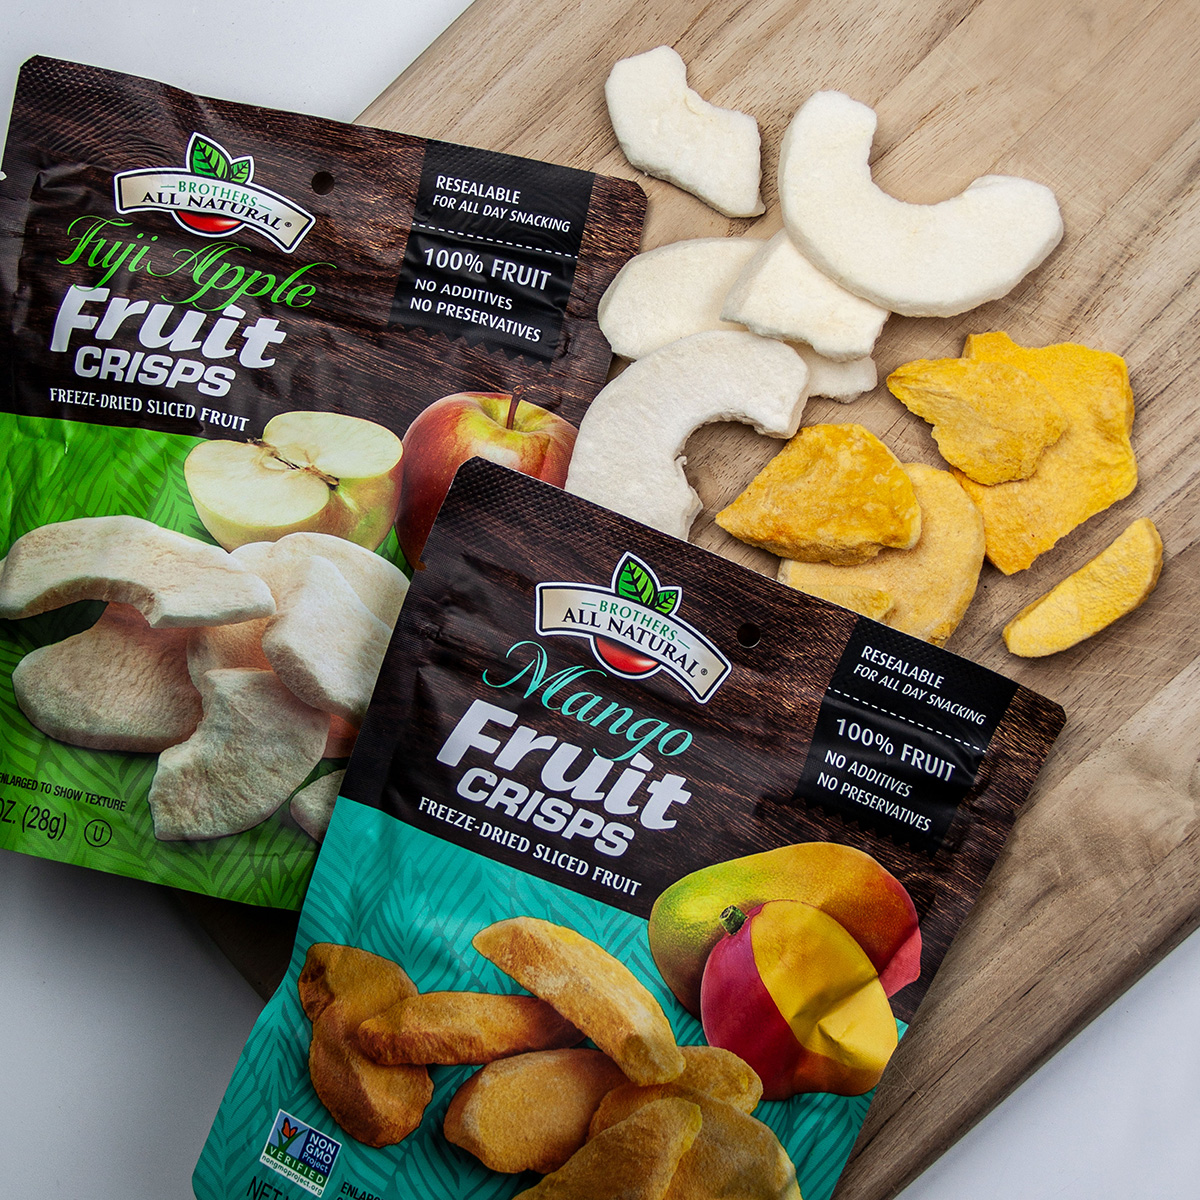 Brothers All Natural Launches 1oz Freeze-Dried Fuji Apple and Mango Fruit Crisps